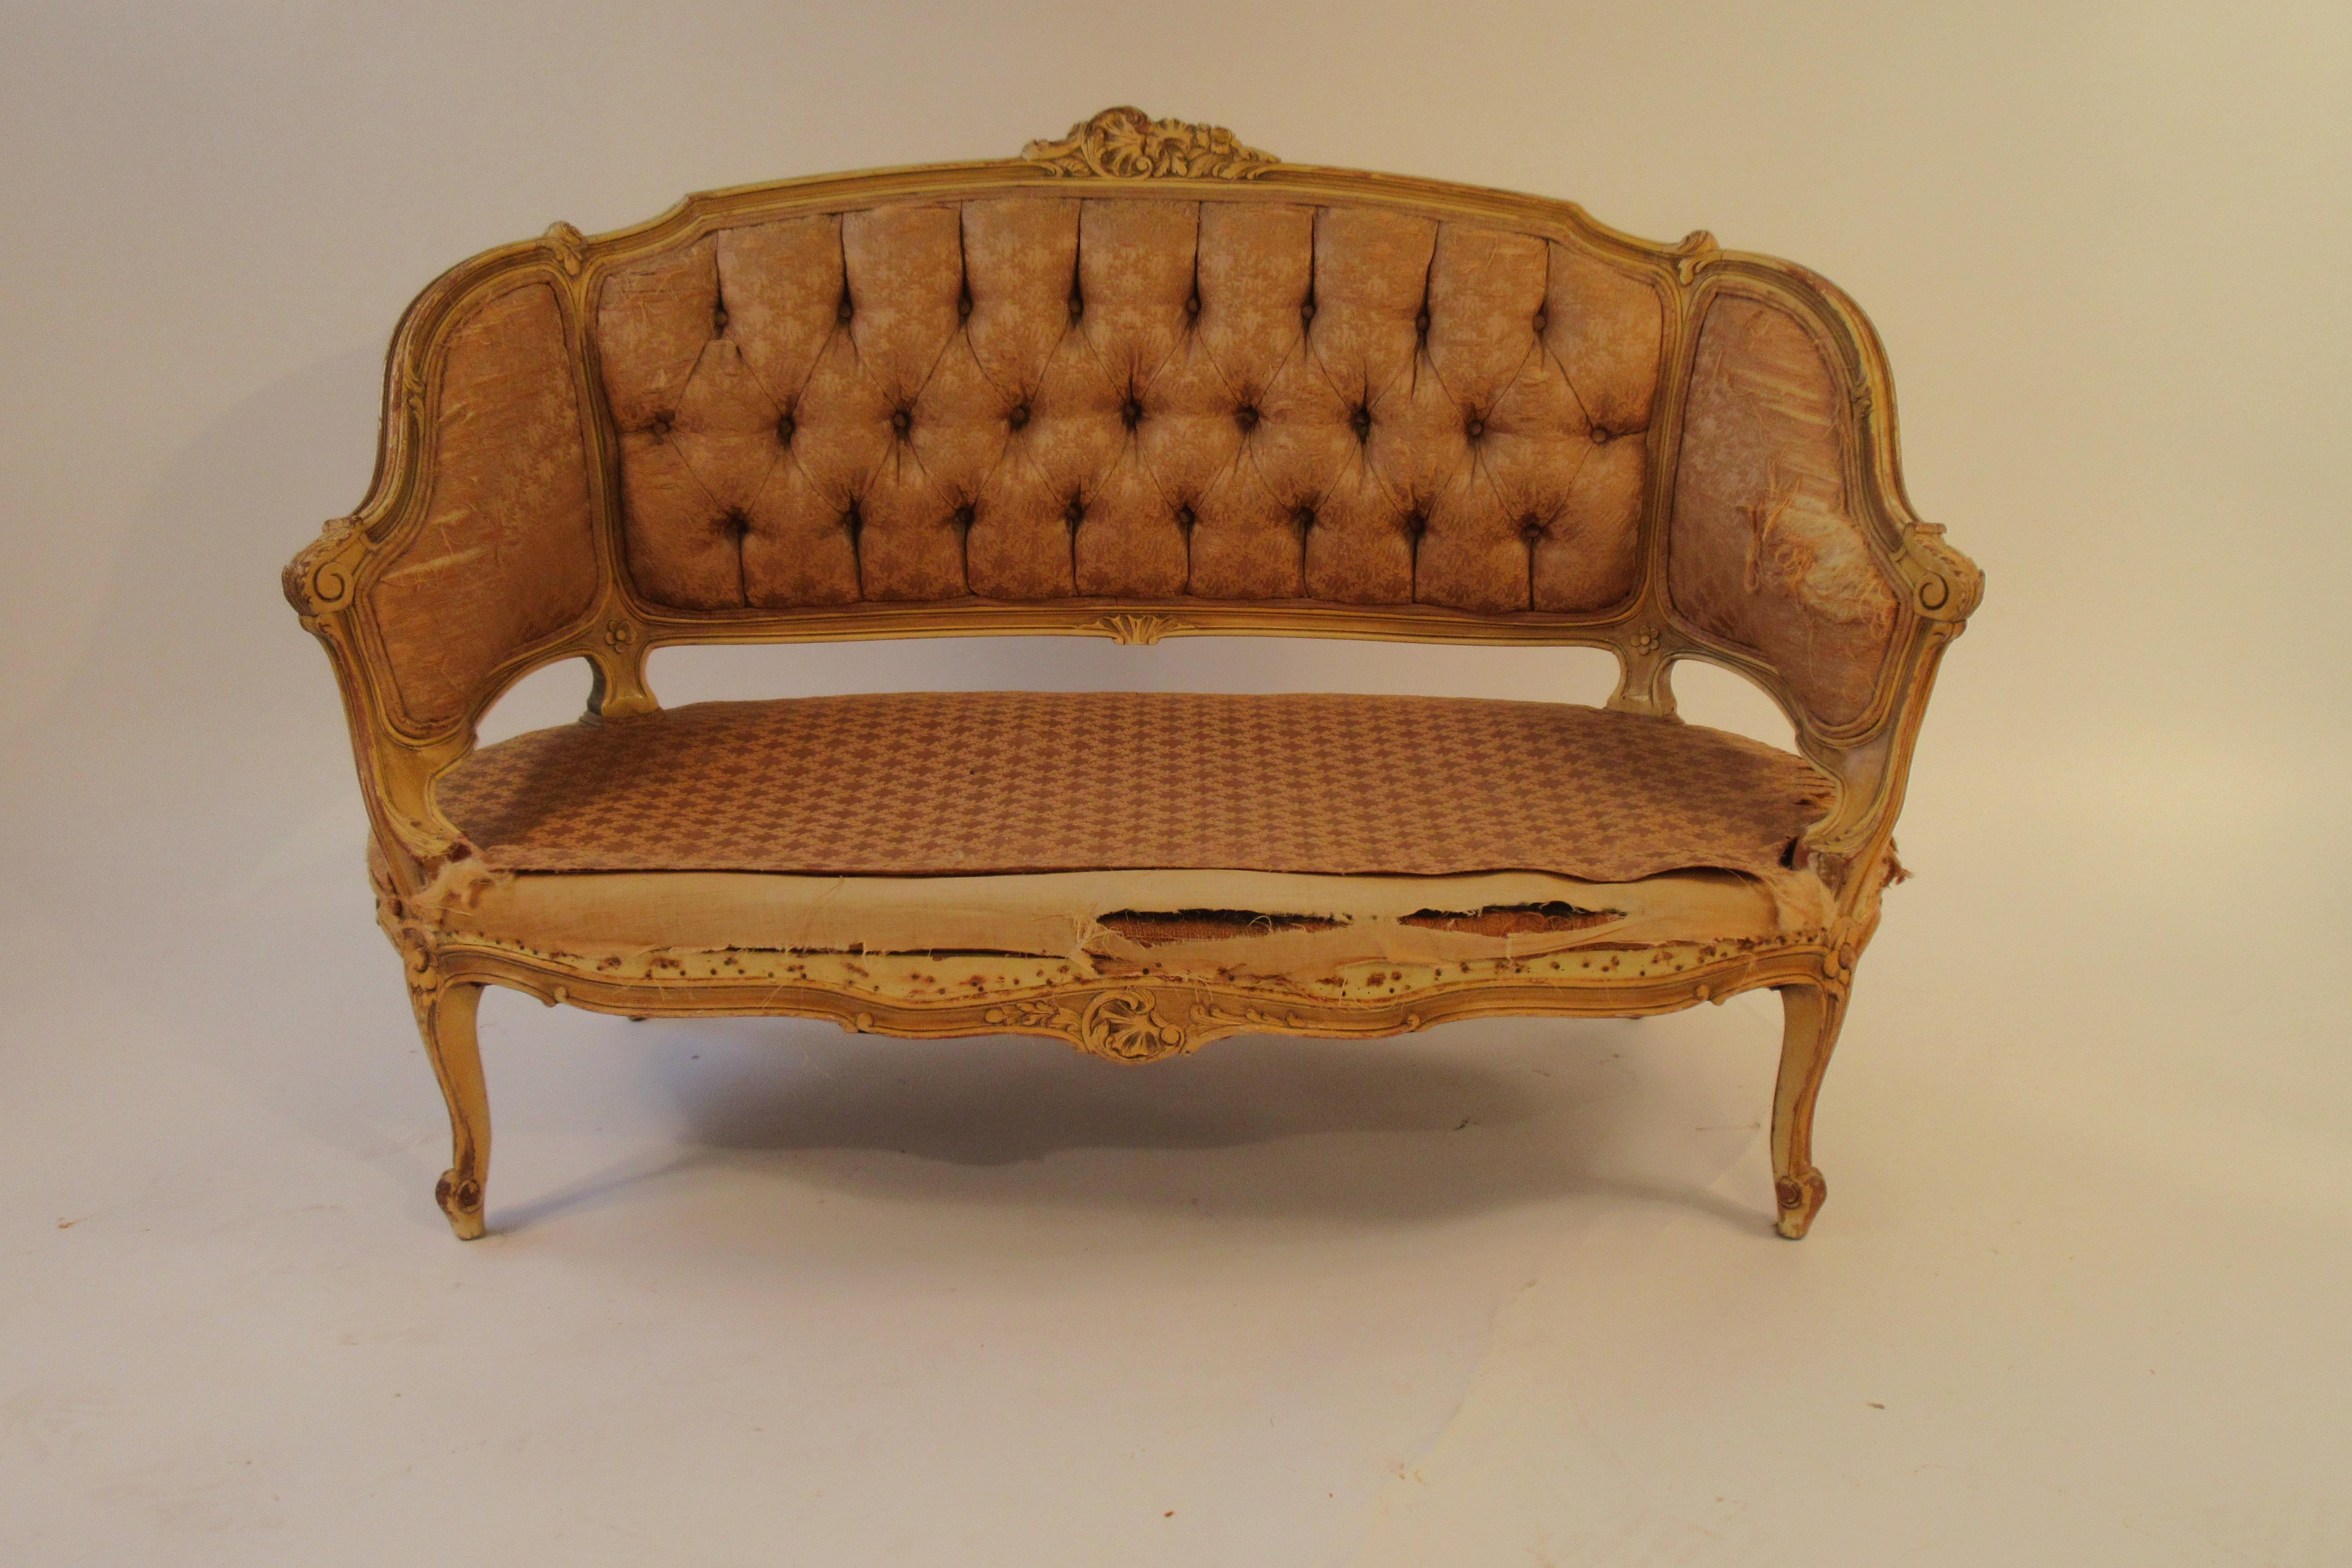 1920s carved wood French settee. Frame needs stripping and reupholstering.